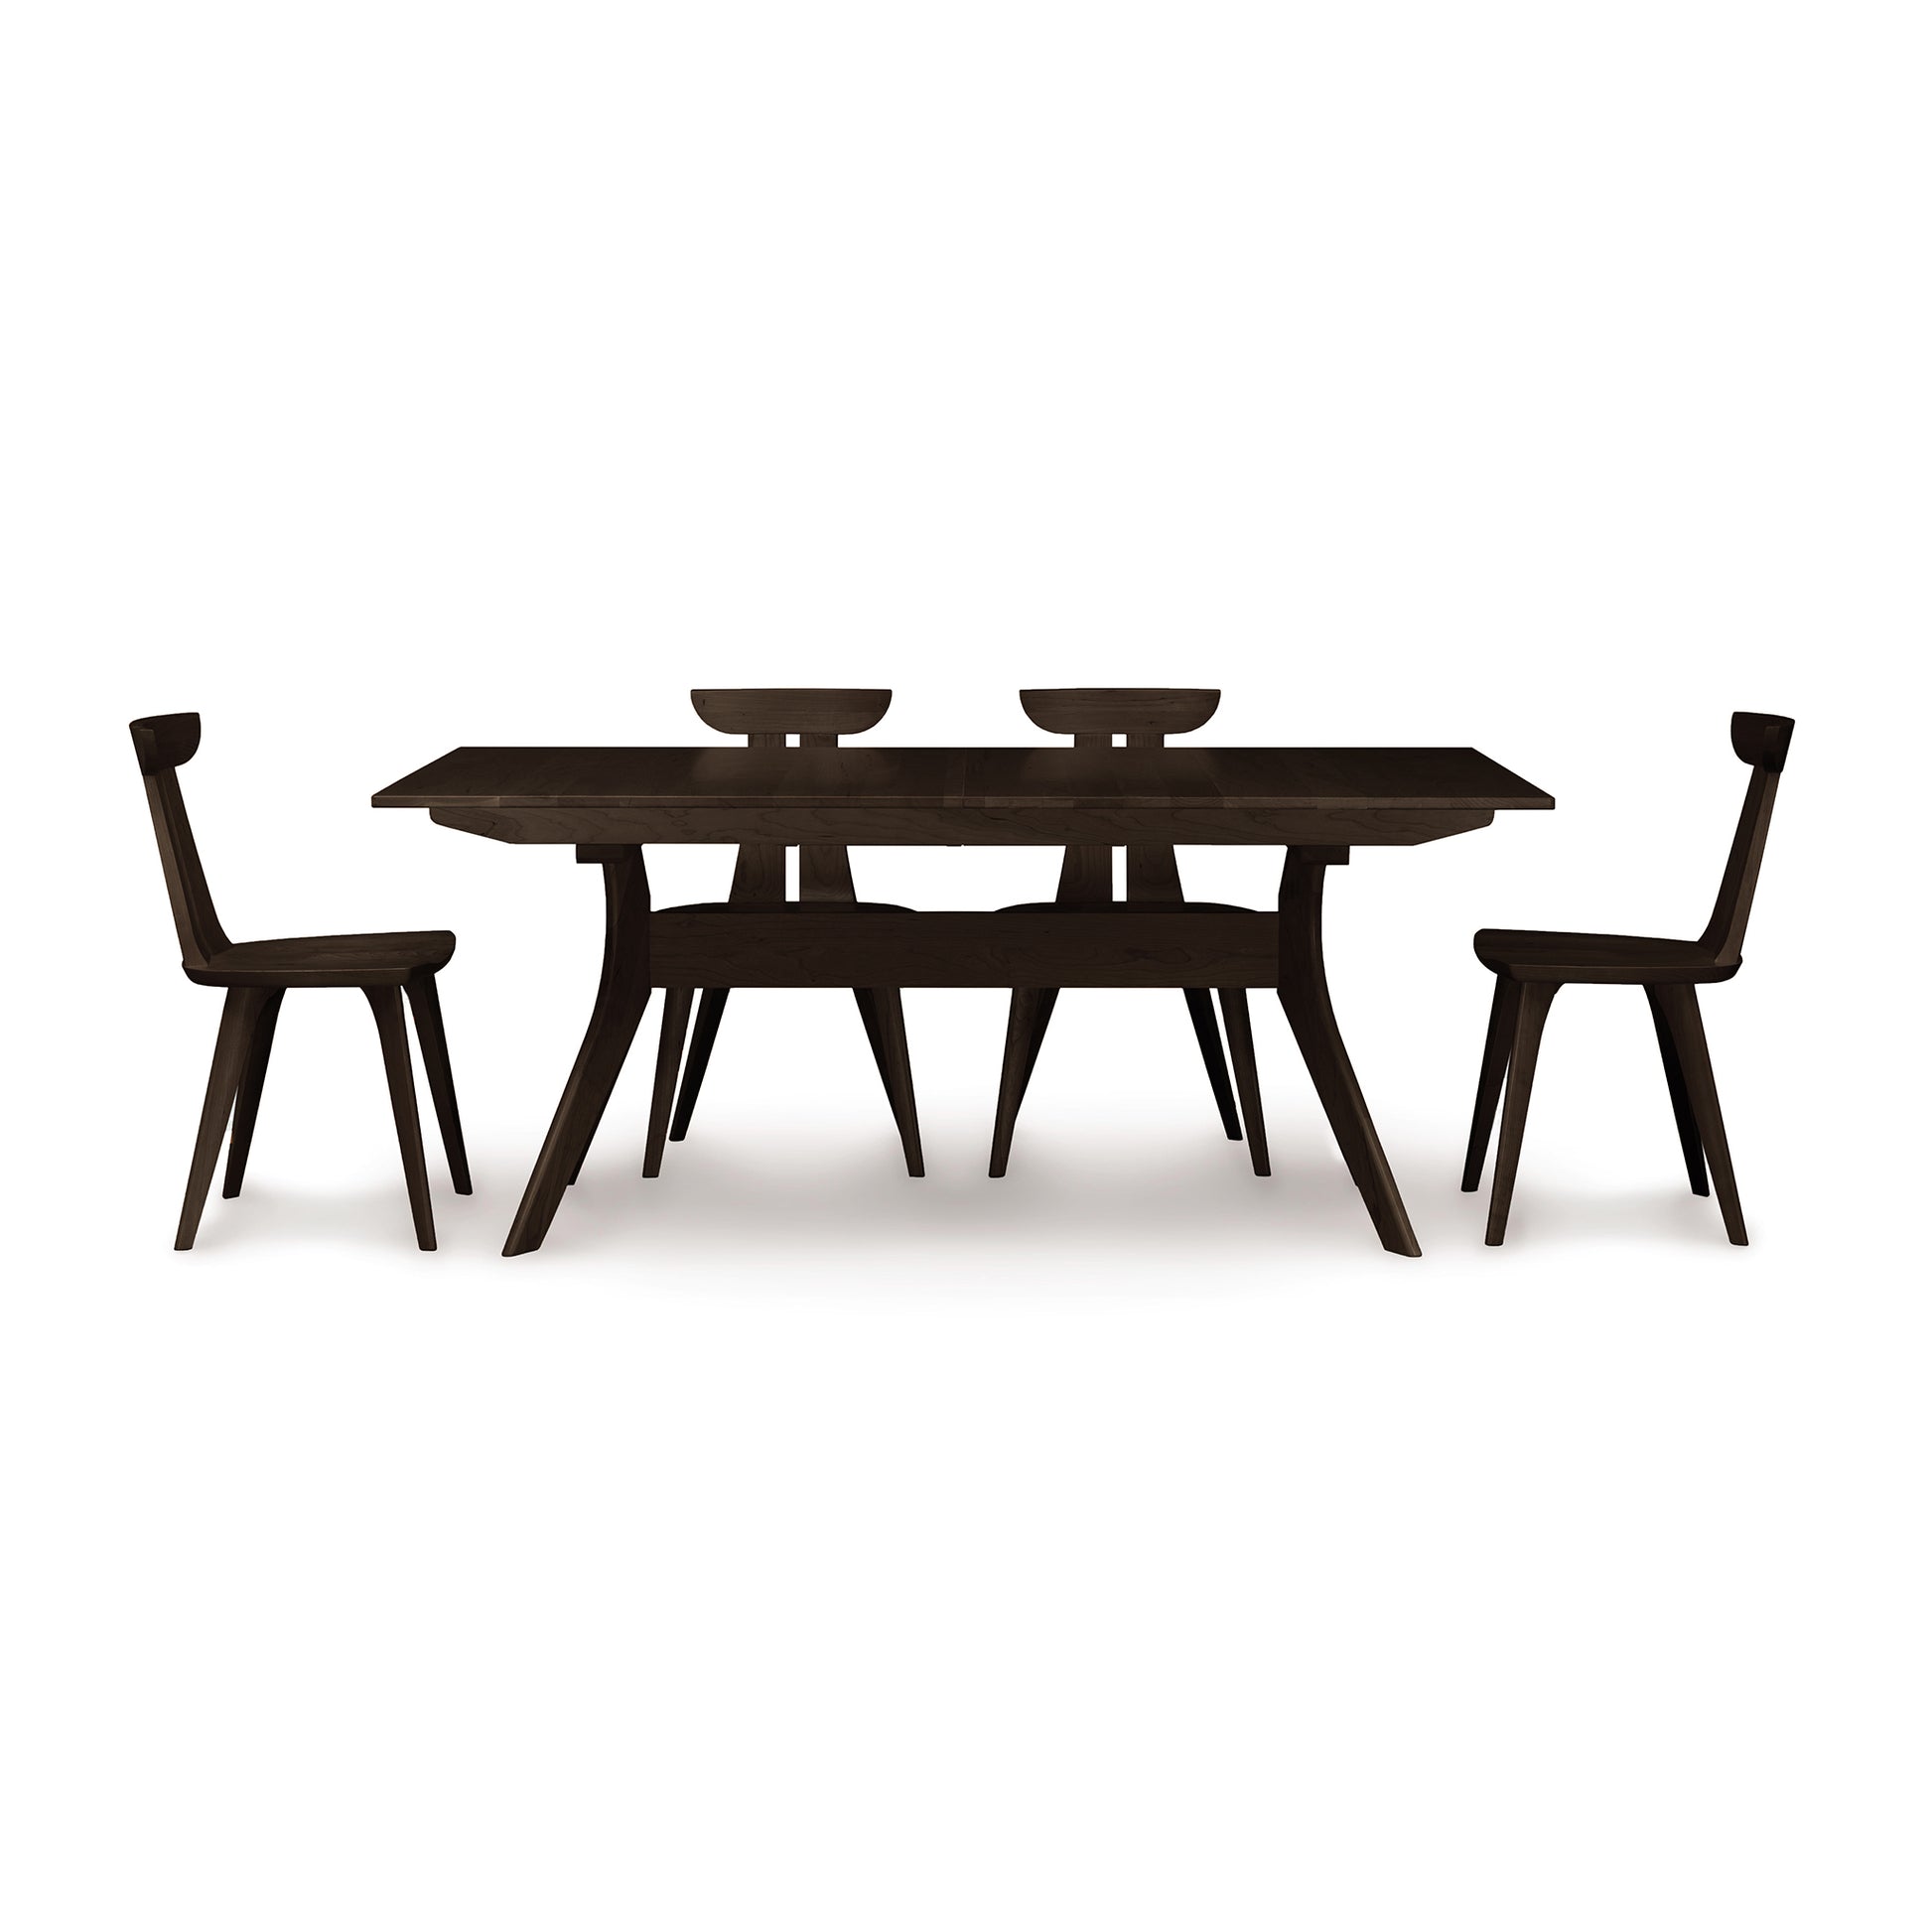 A modern Audrey Extension Dining Table by Copeland Furniture with four matching chairs, isolated on a white background.